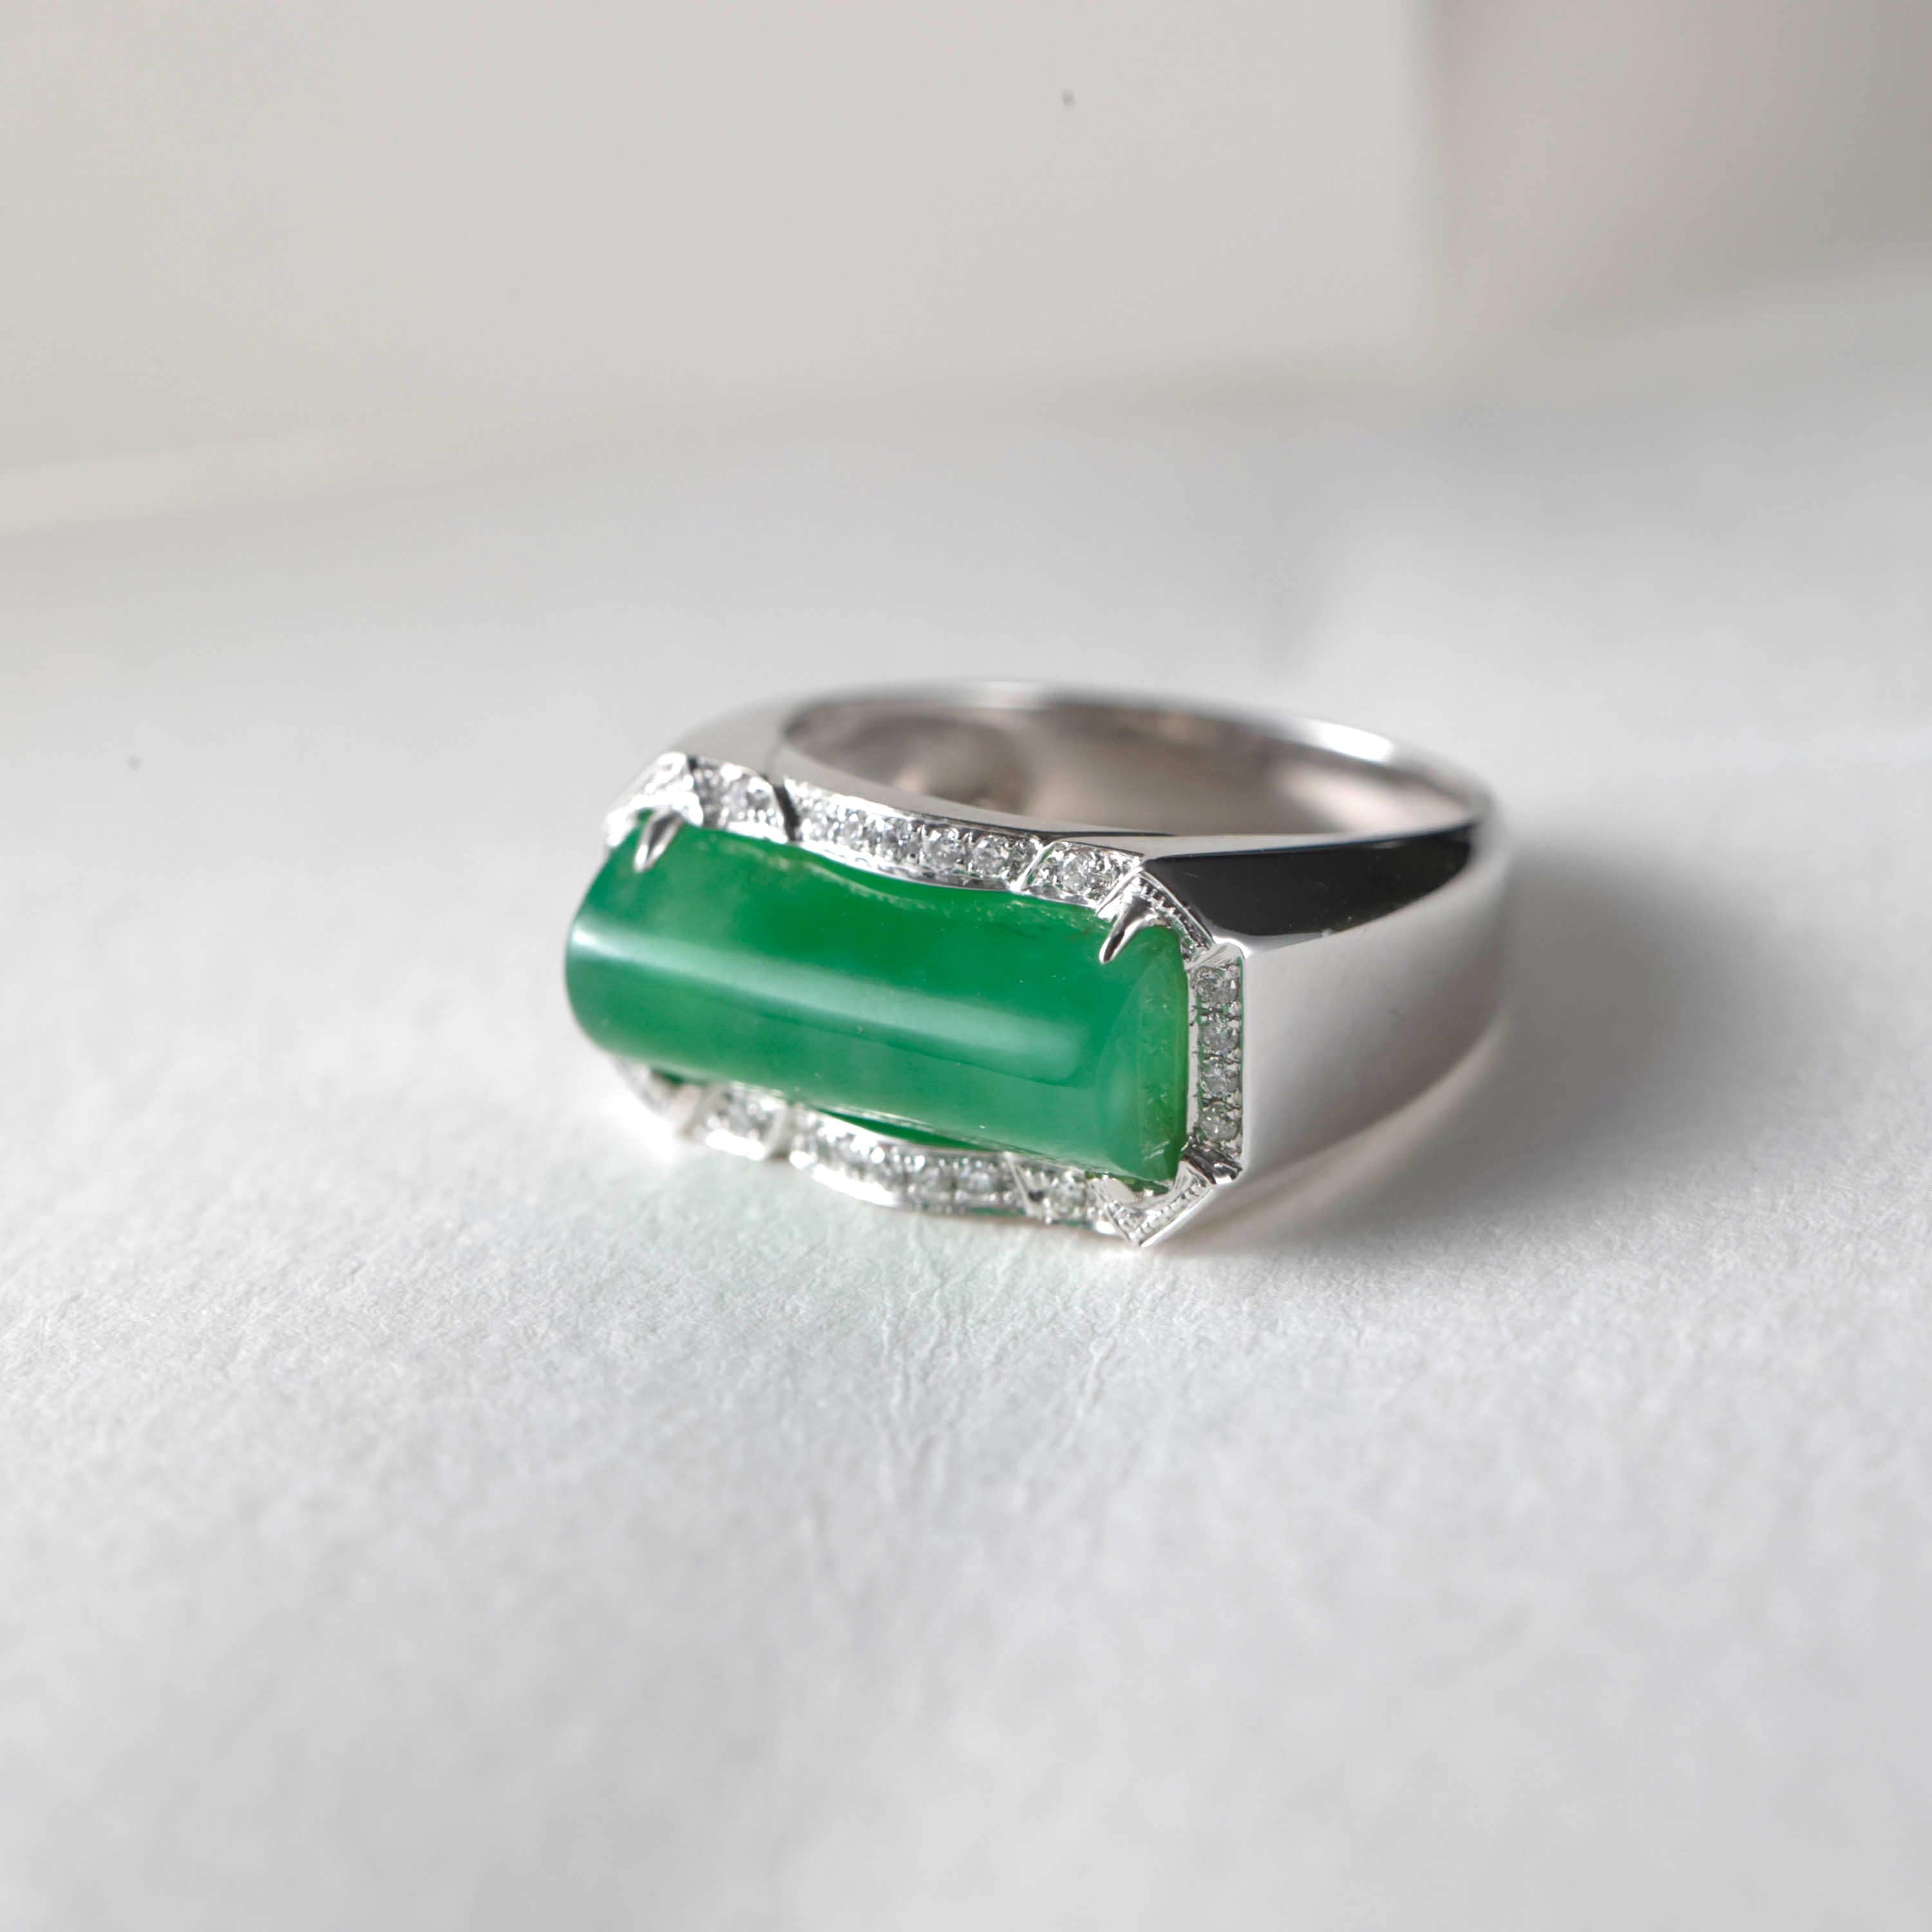 Jade Ring with Diamonds Certified Untreated, New & Unworn Size 9.5 In New Condition For Sale In Southbury, CT